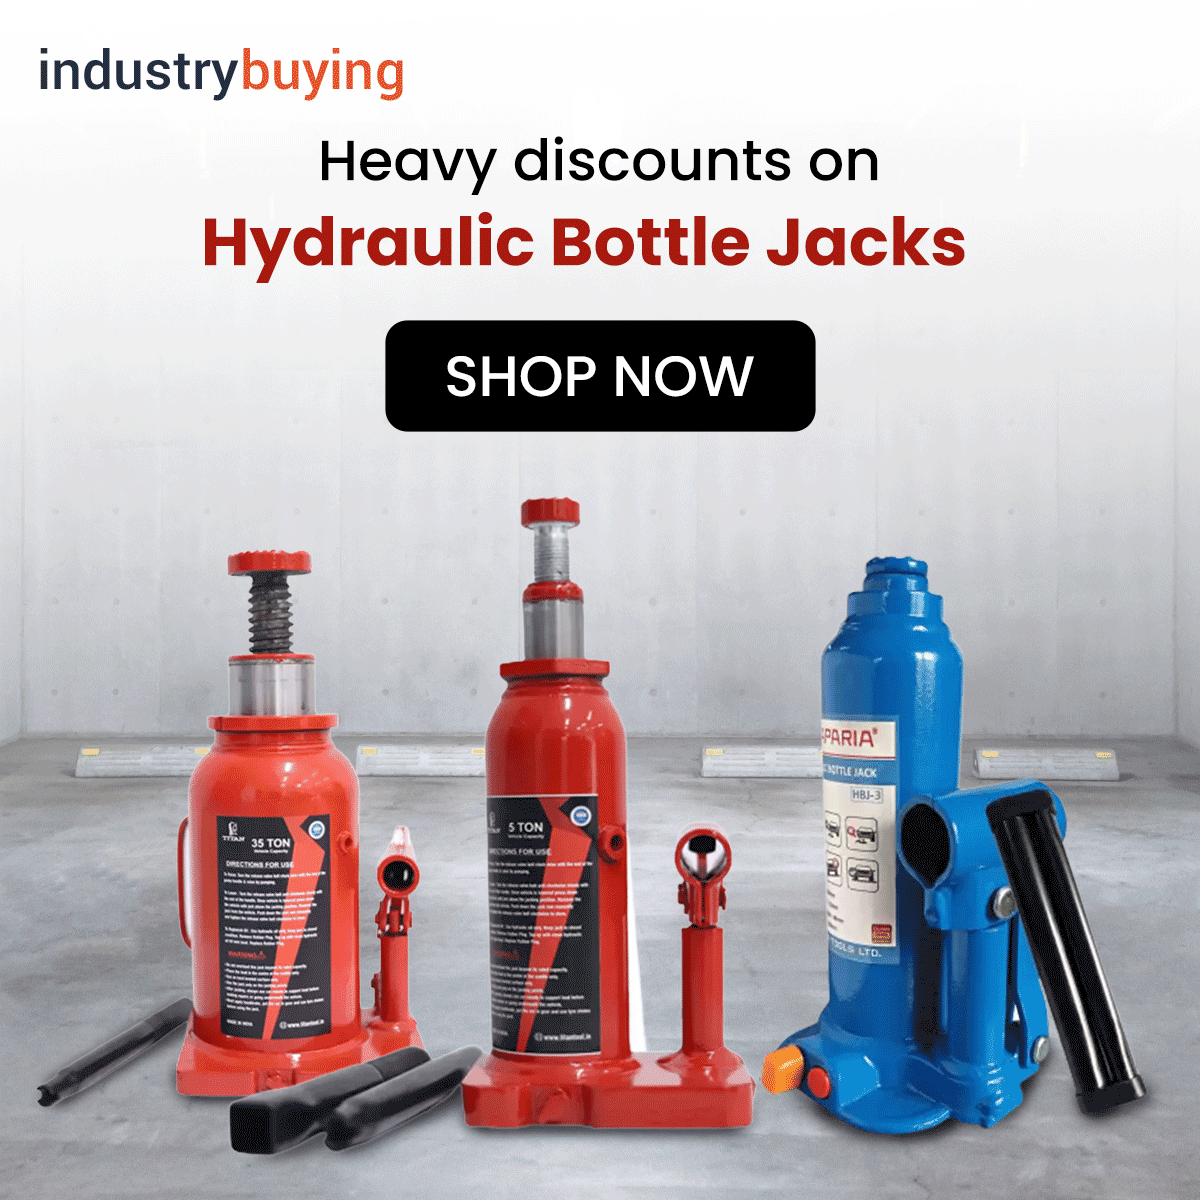 Lift heavy loads effortlessly with our reliable Hydraulic Bottle Jacks

Link: bit.ly/3N6nEbI

#hydraulicjack #bottlejack #jack #caraccessories #cartools #carspares #cars #carcare  #vehiclespareparts  #automotiveaccessories #industrybuying #ecommerce #b2b #Automotives